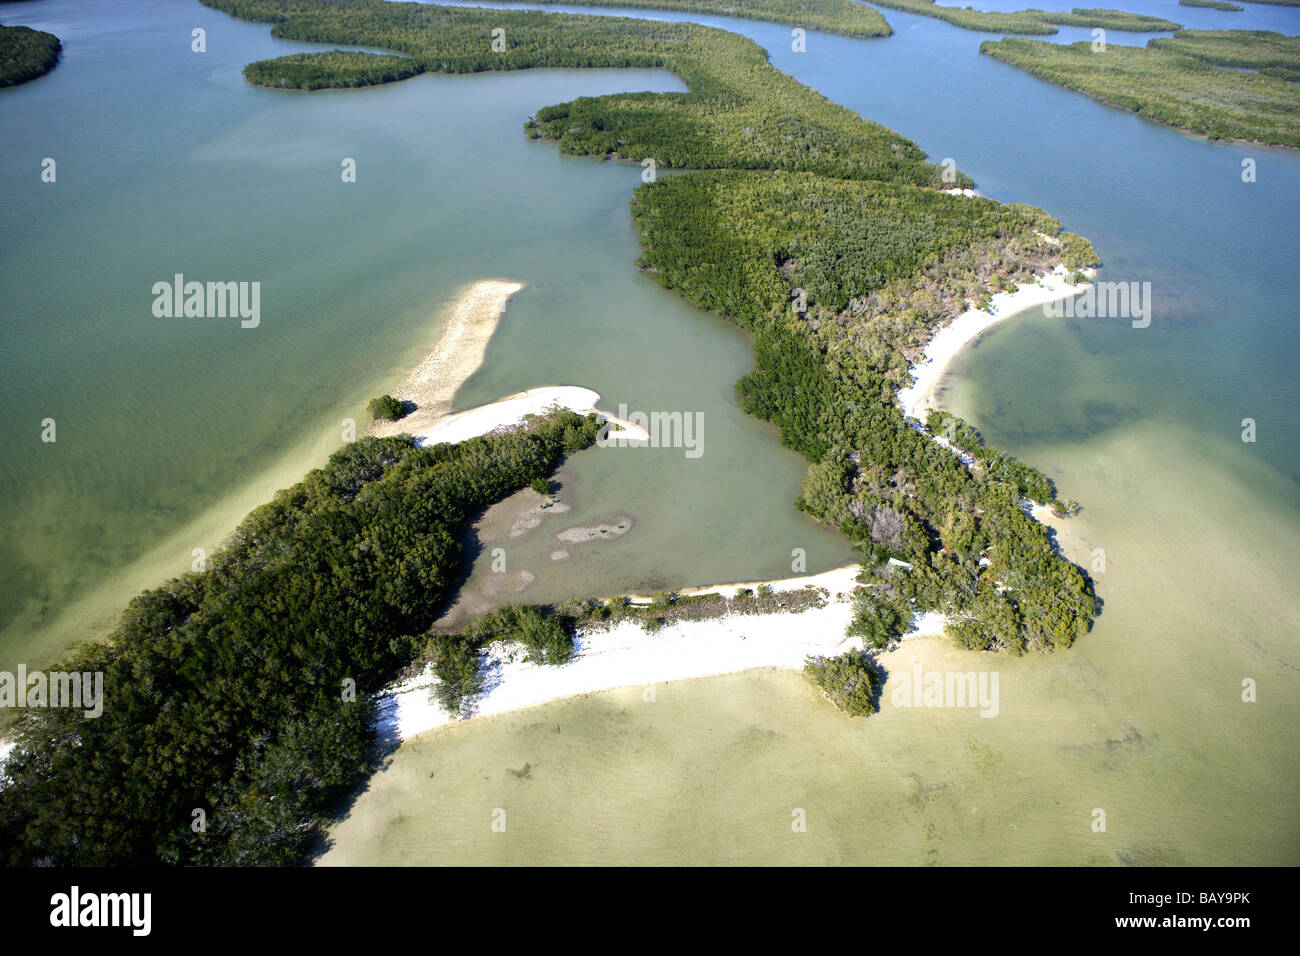 Aerial view of mangroves at Ten Thousand Islands National Wildlife Refuge, Florida, USA Stock Photo